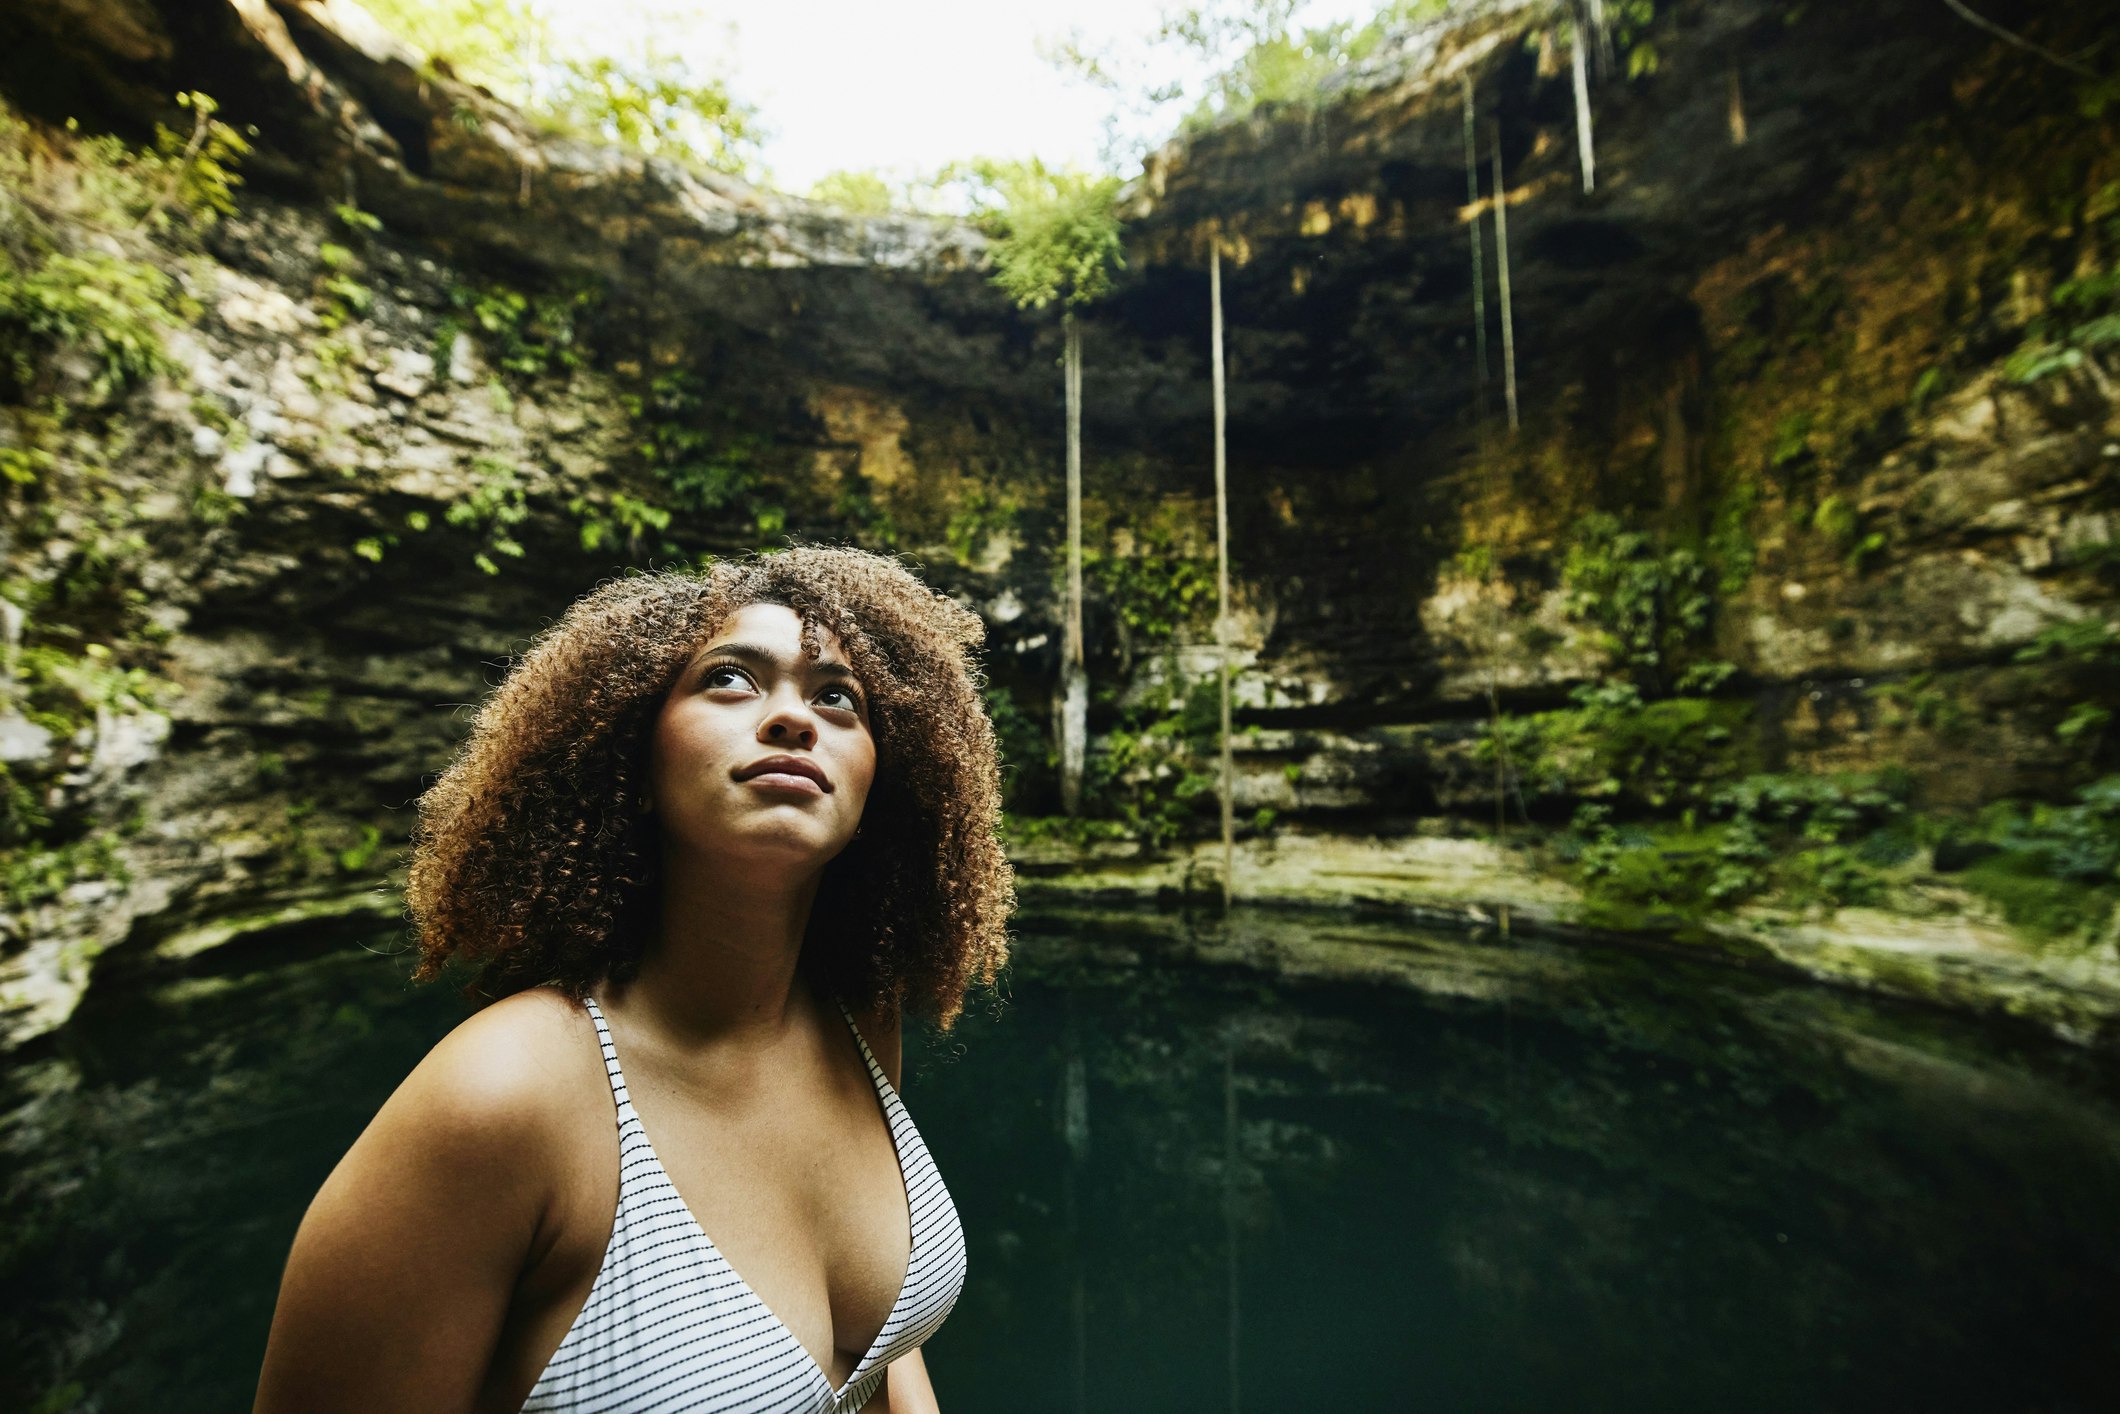 A woman standing near a subterranean swimming hole looking up at the natural walls around her